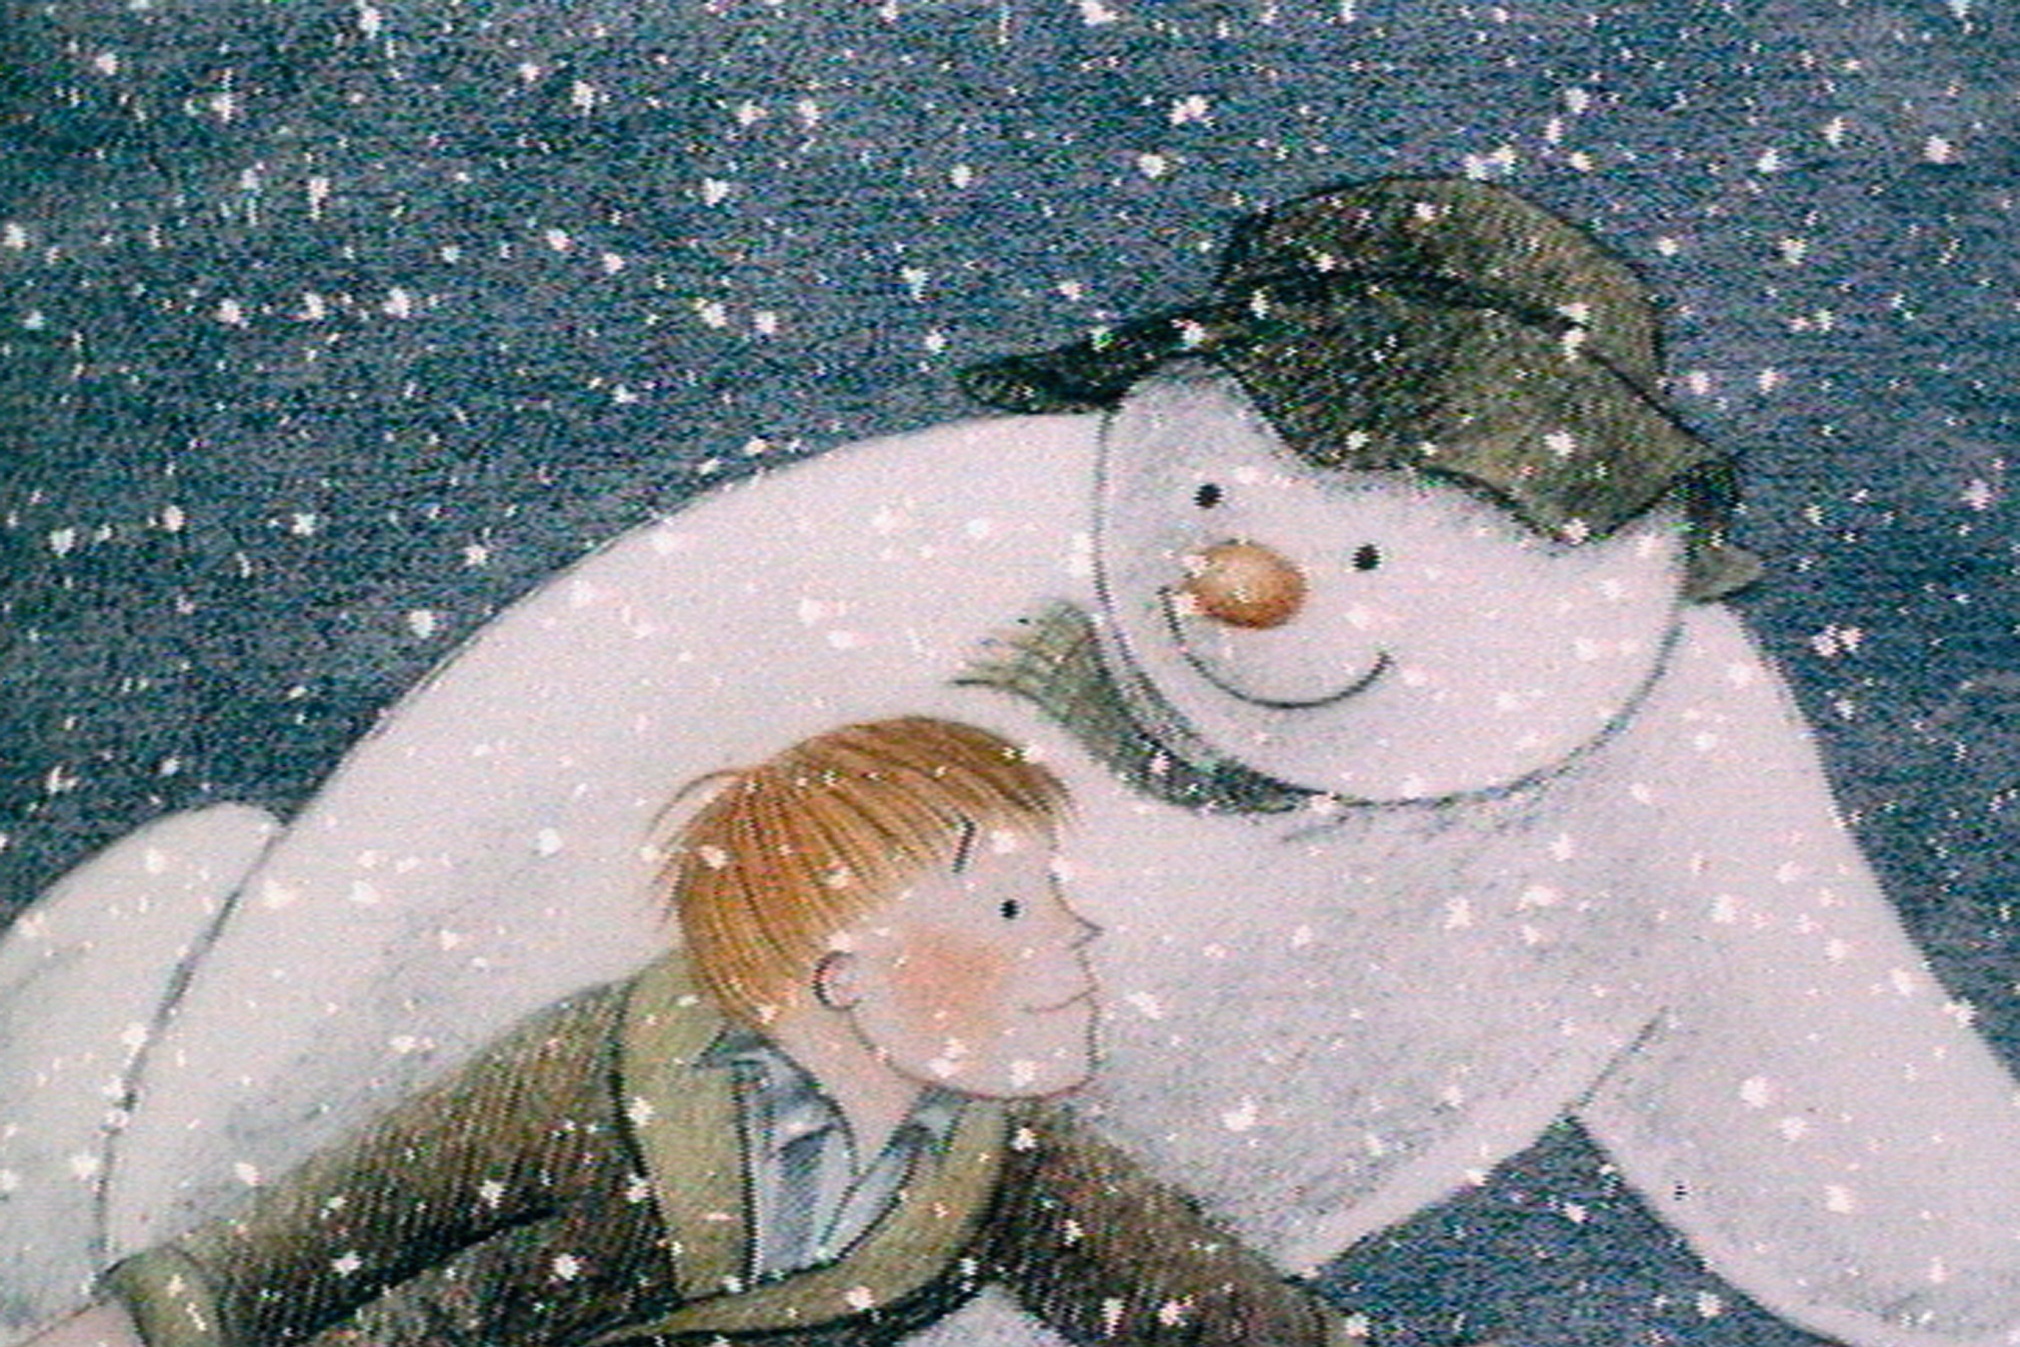 Live performance from BSO to accompany screening of festive classic The Snowman